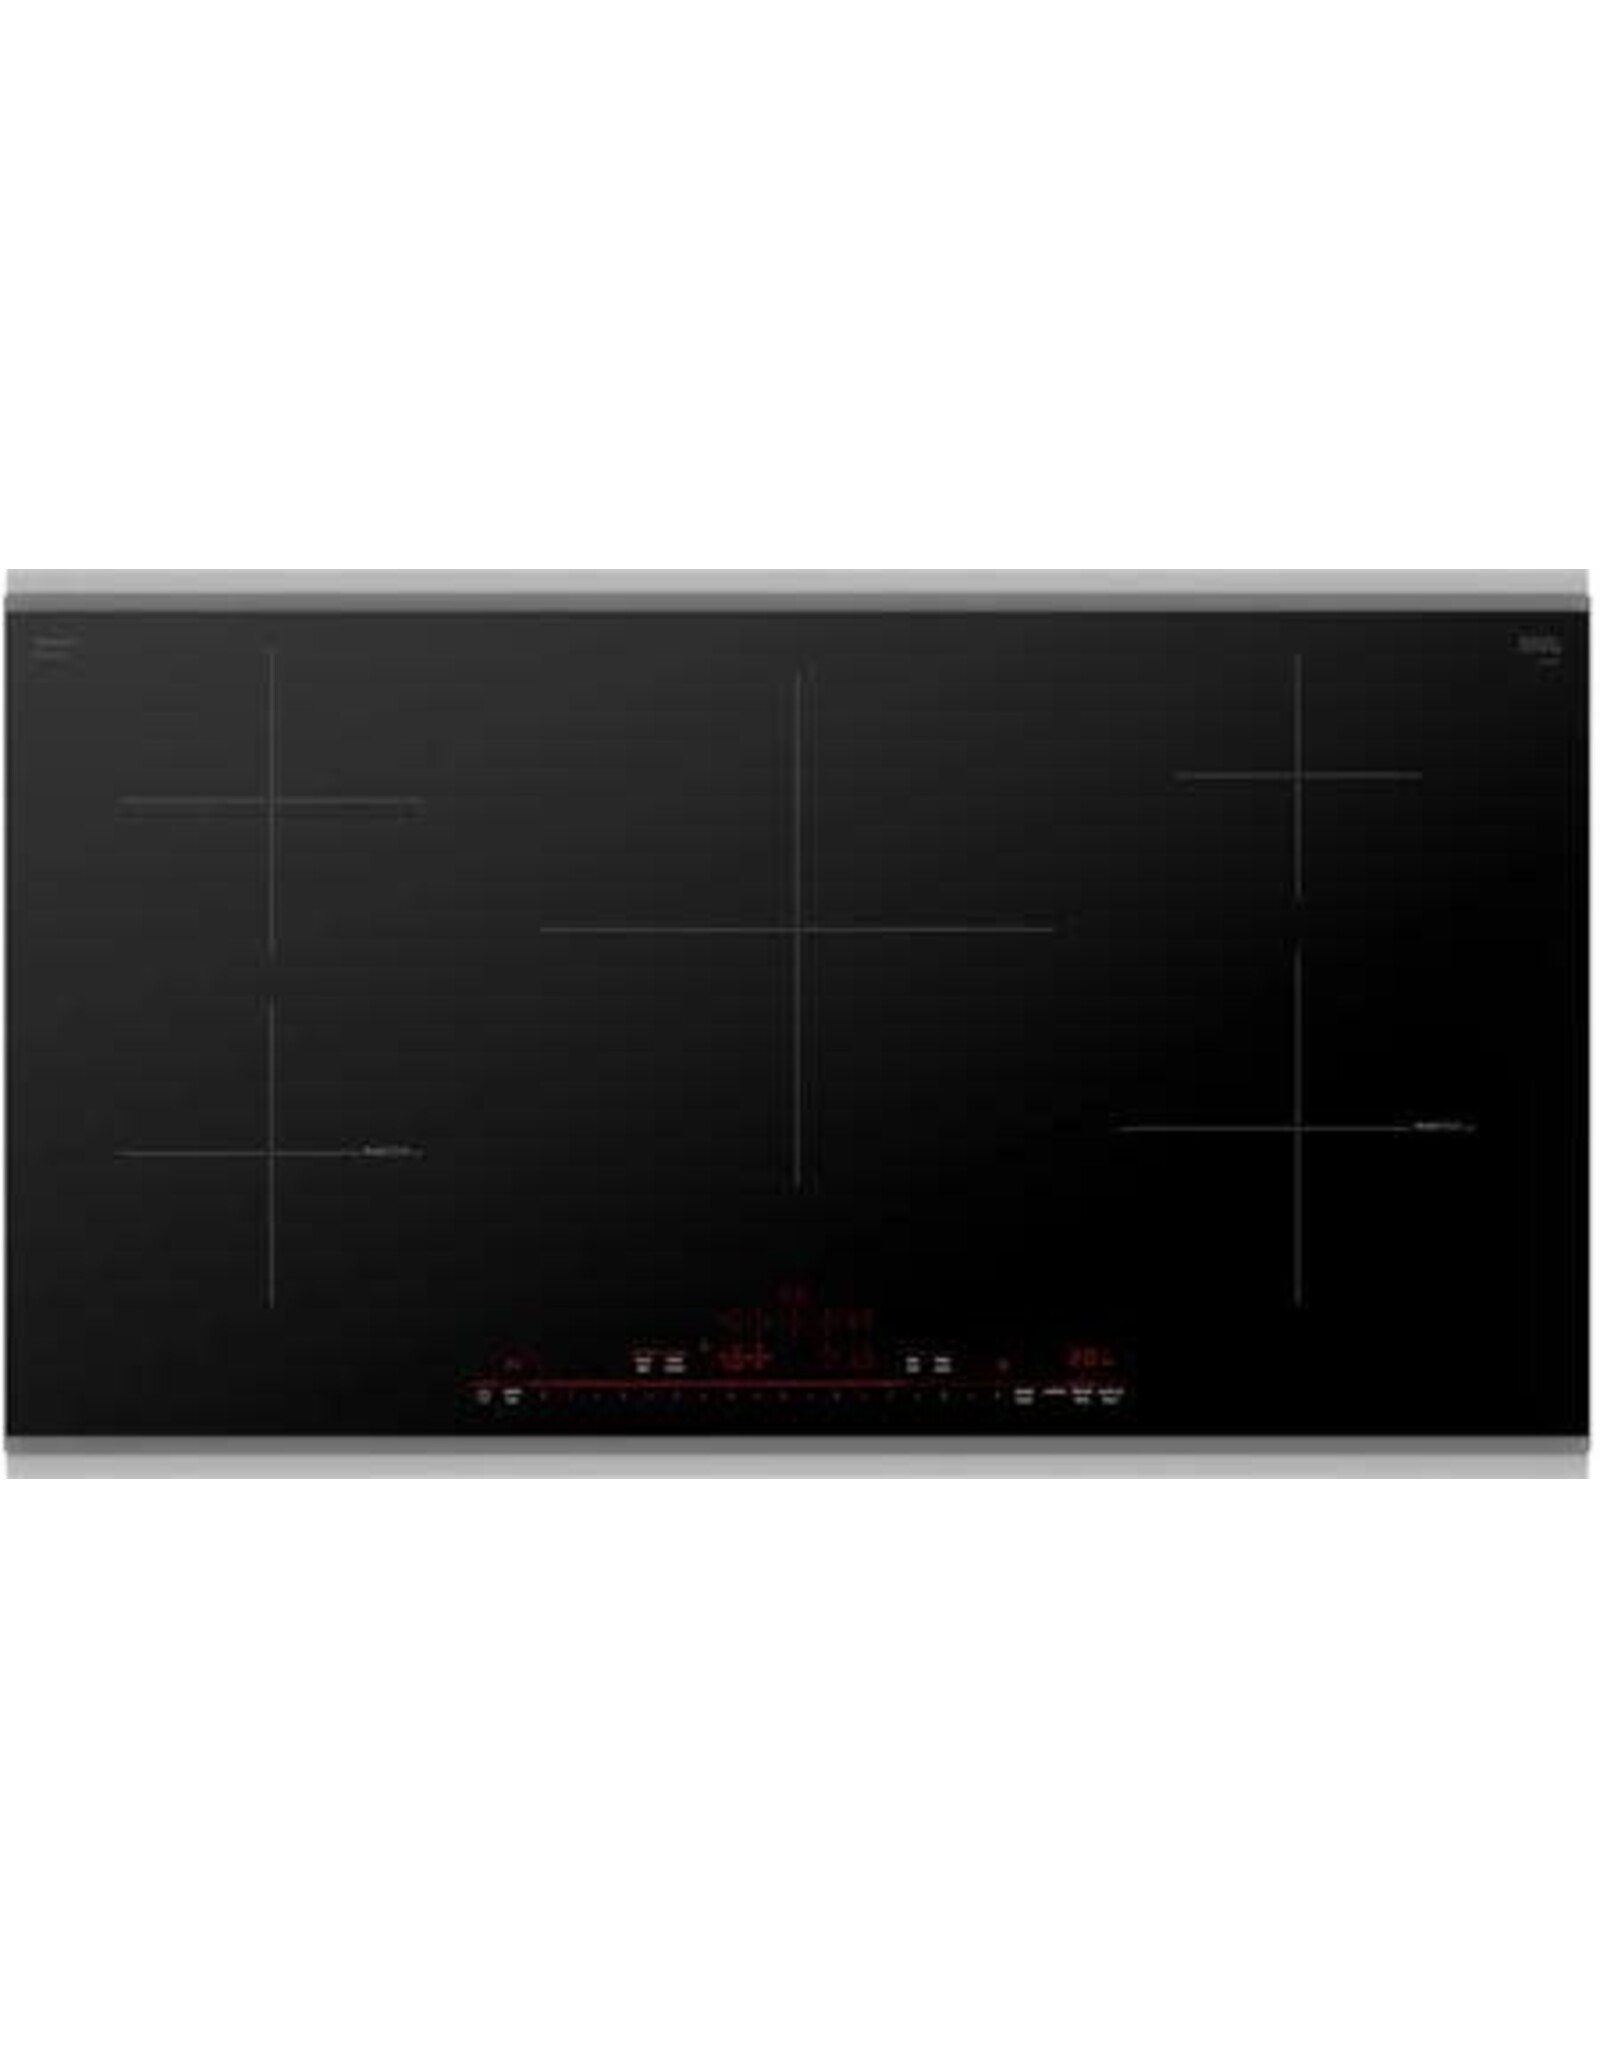 NIT8660SUC  800 36 in. Induction Cooktop in Black with Stainless Steel Trim with 5 Elements